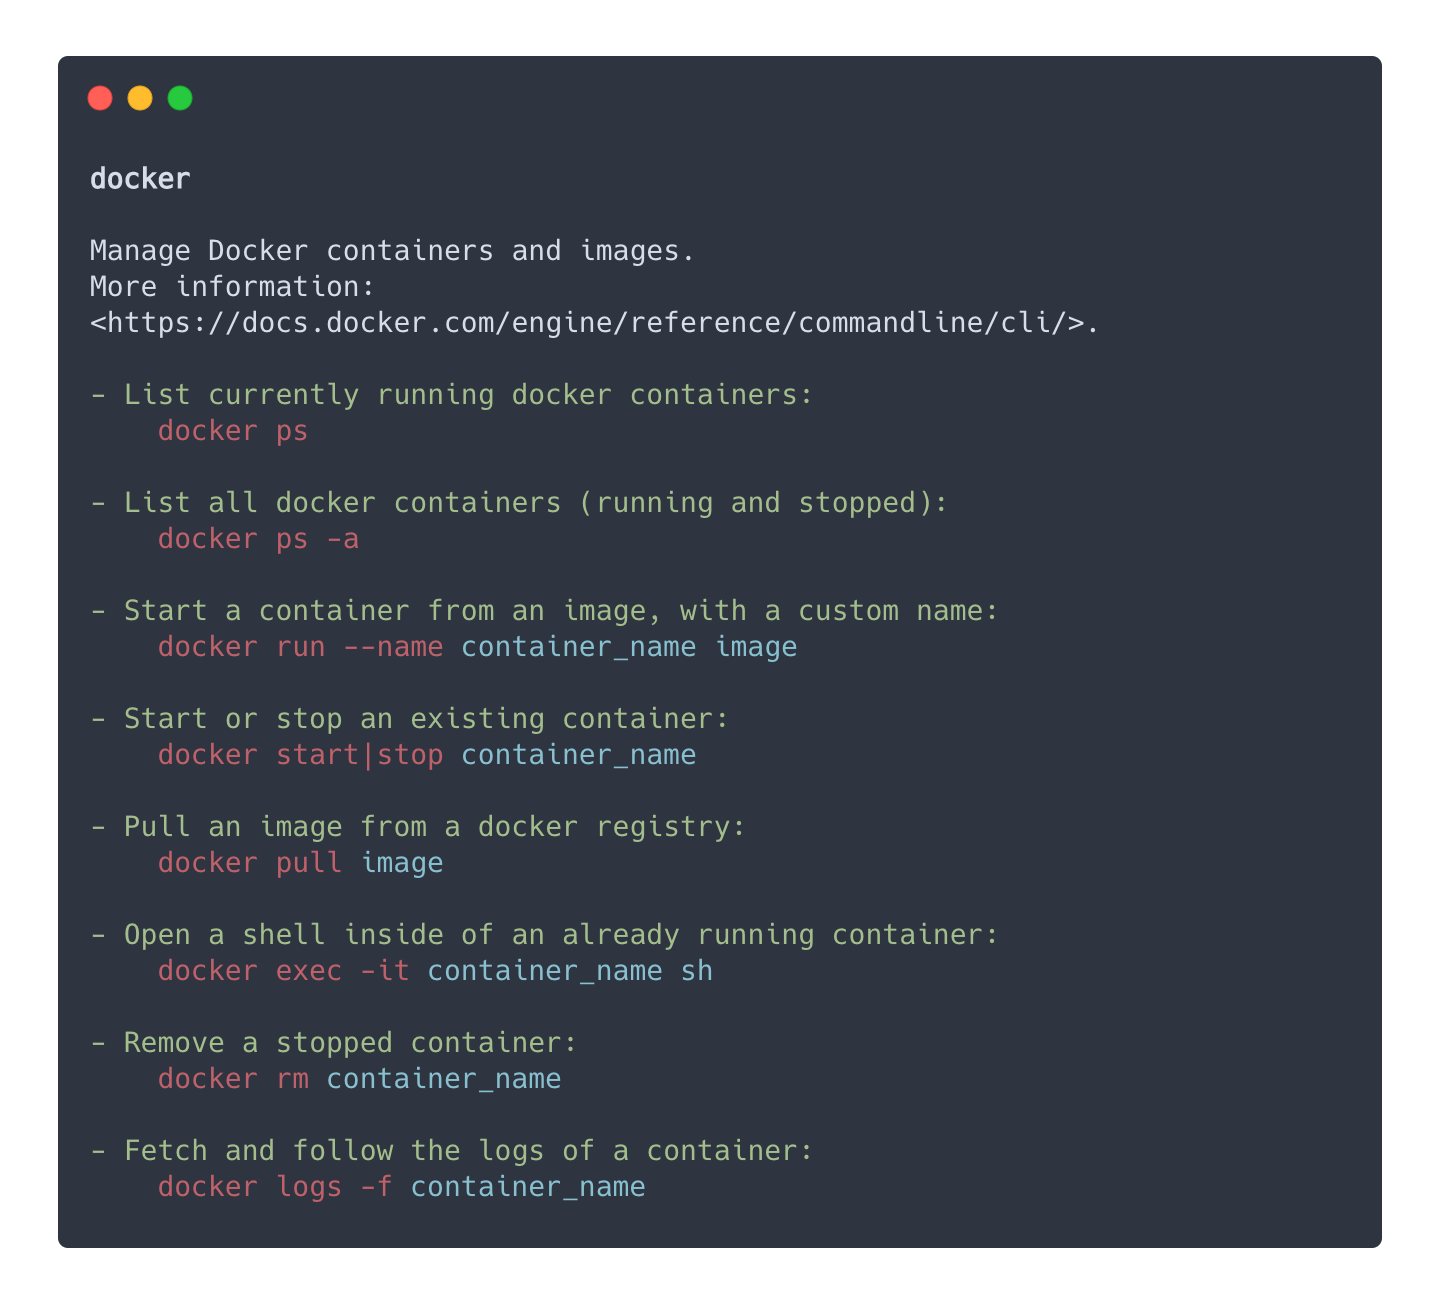 The tldr output for the docker command. It's a list of of short descriptions like "List currently running docker containers" and the corresponding commands, like "docker ps".